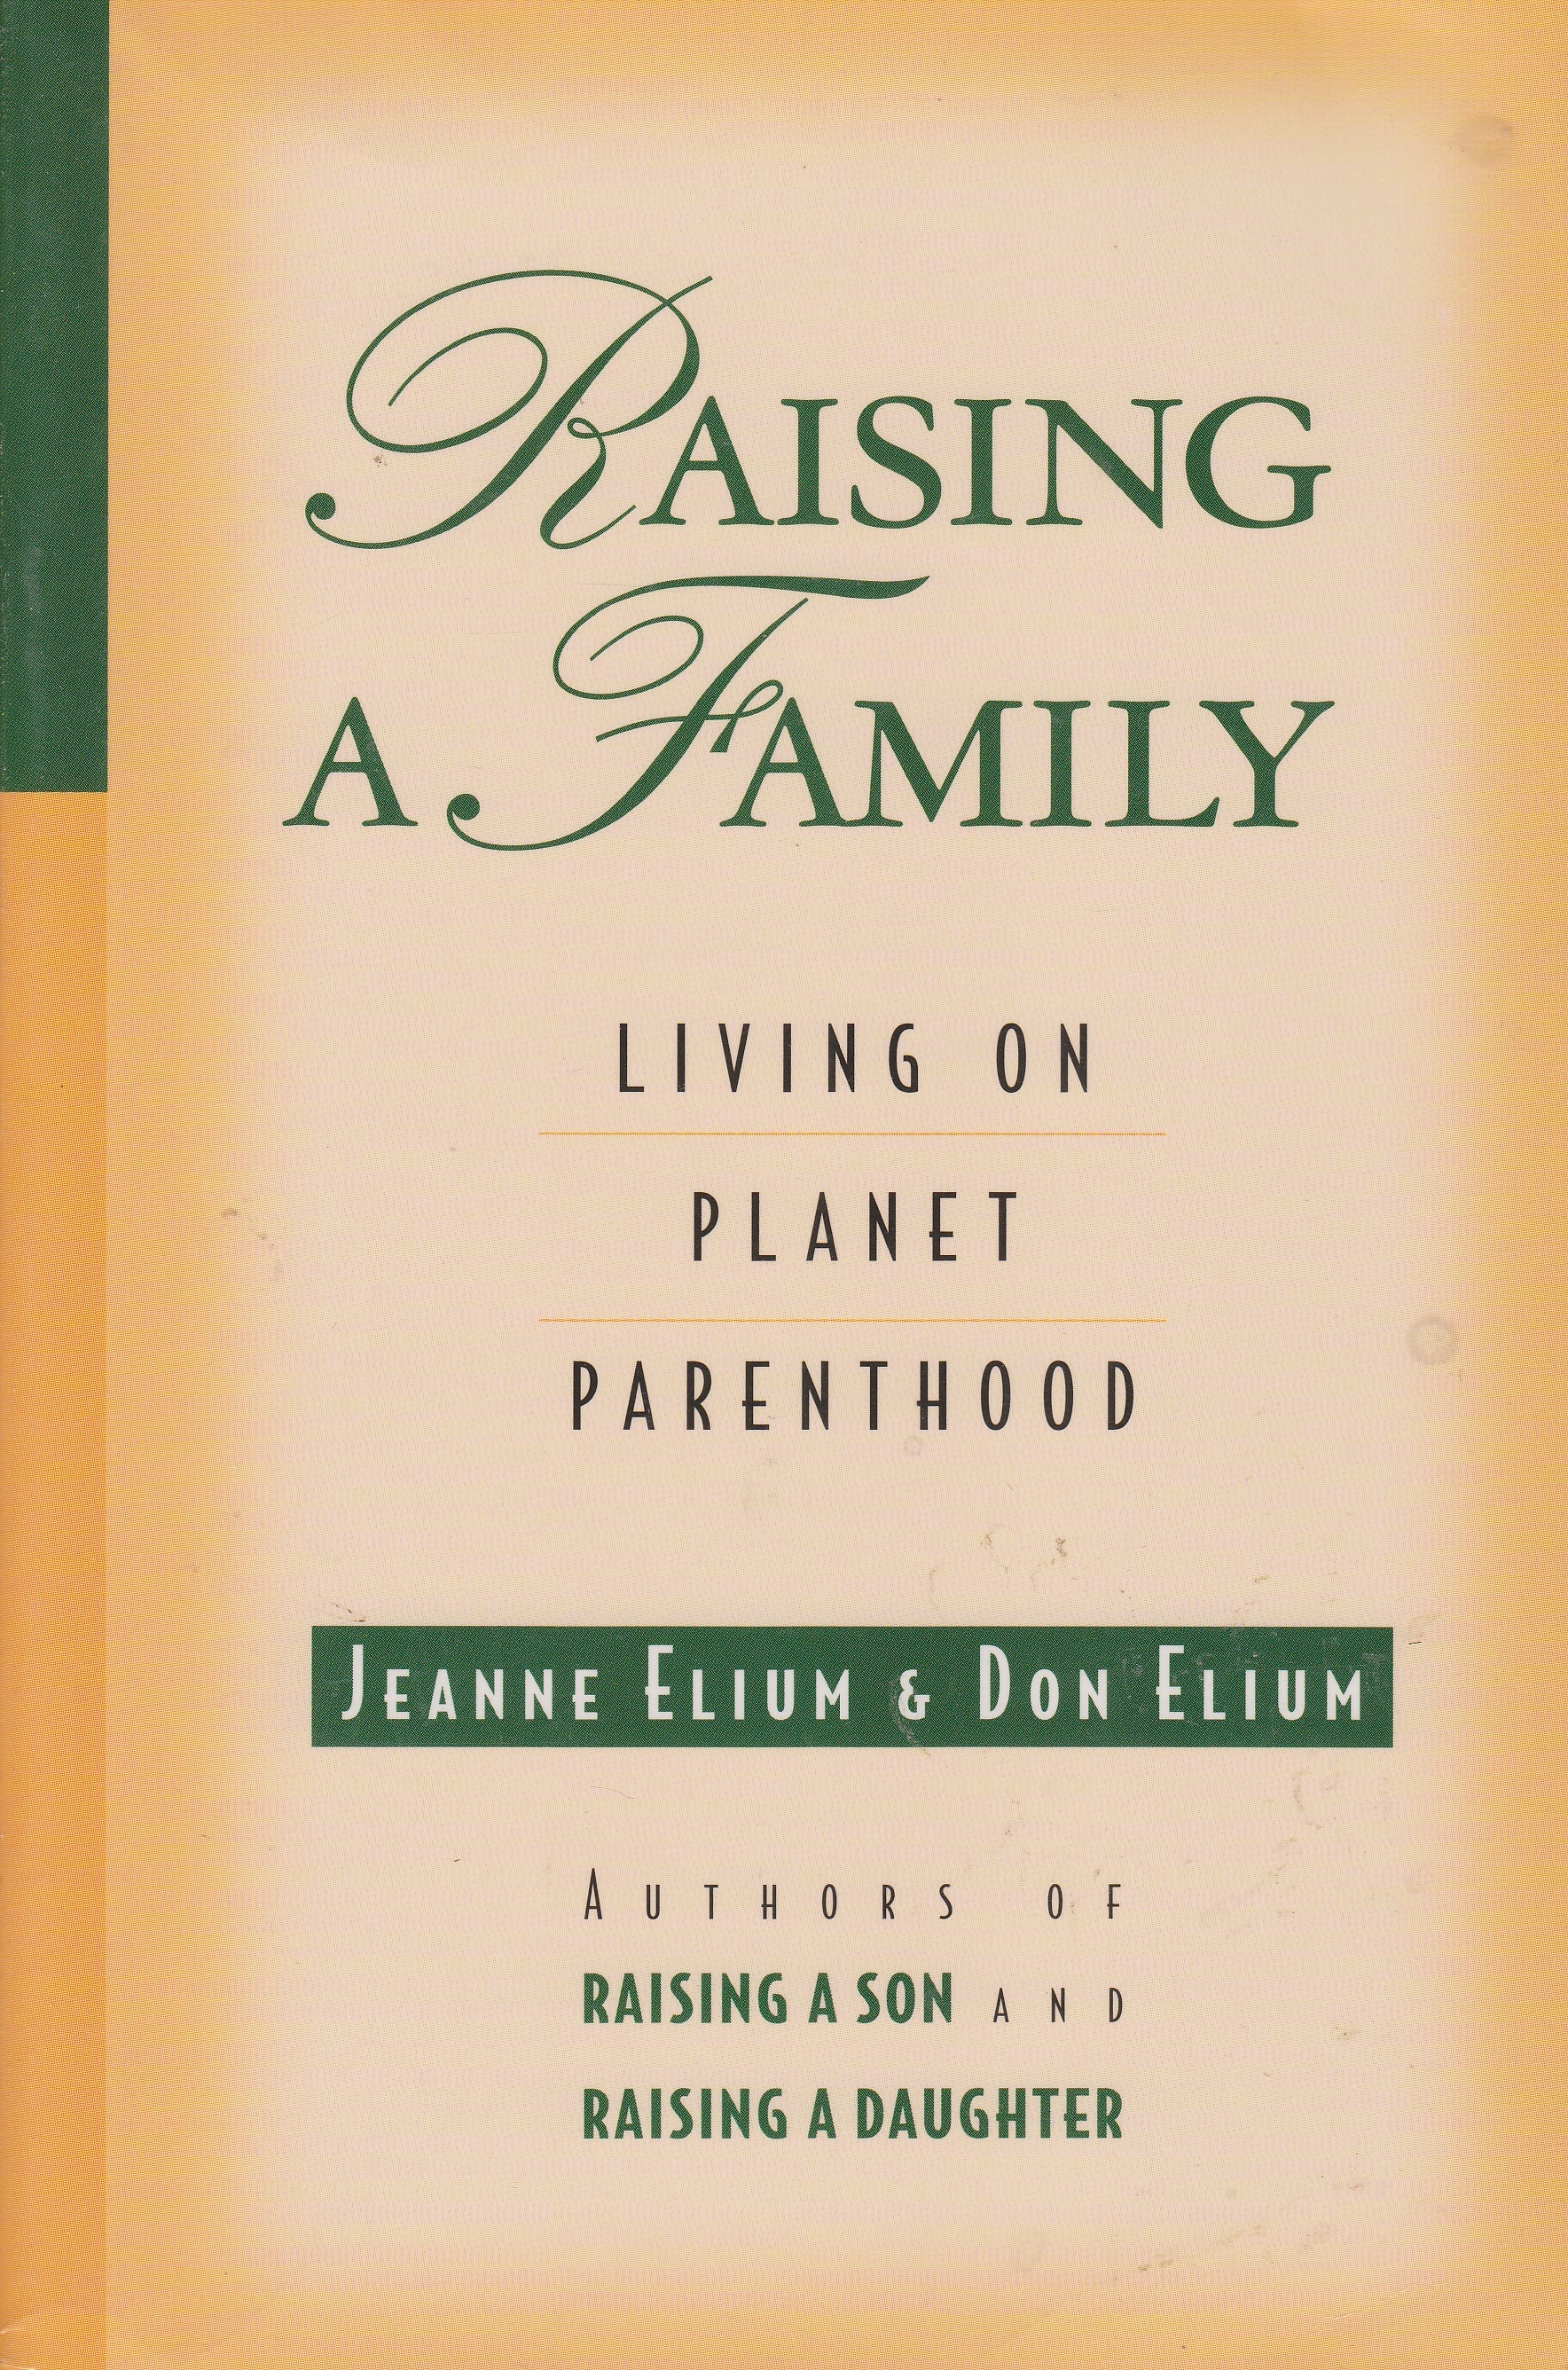 Image for Raising a Family Living on Planet Parenthood